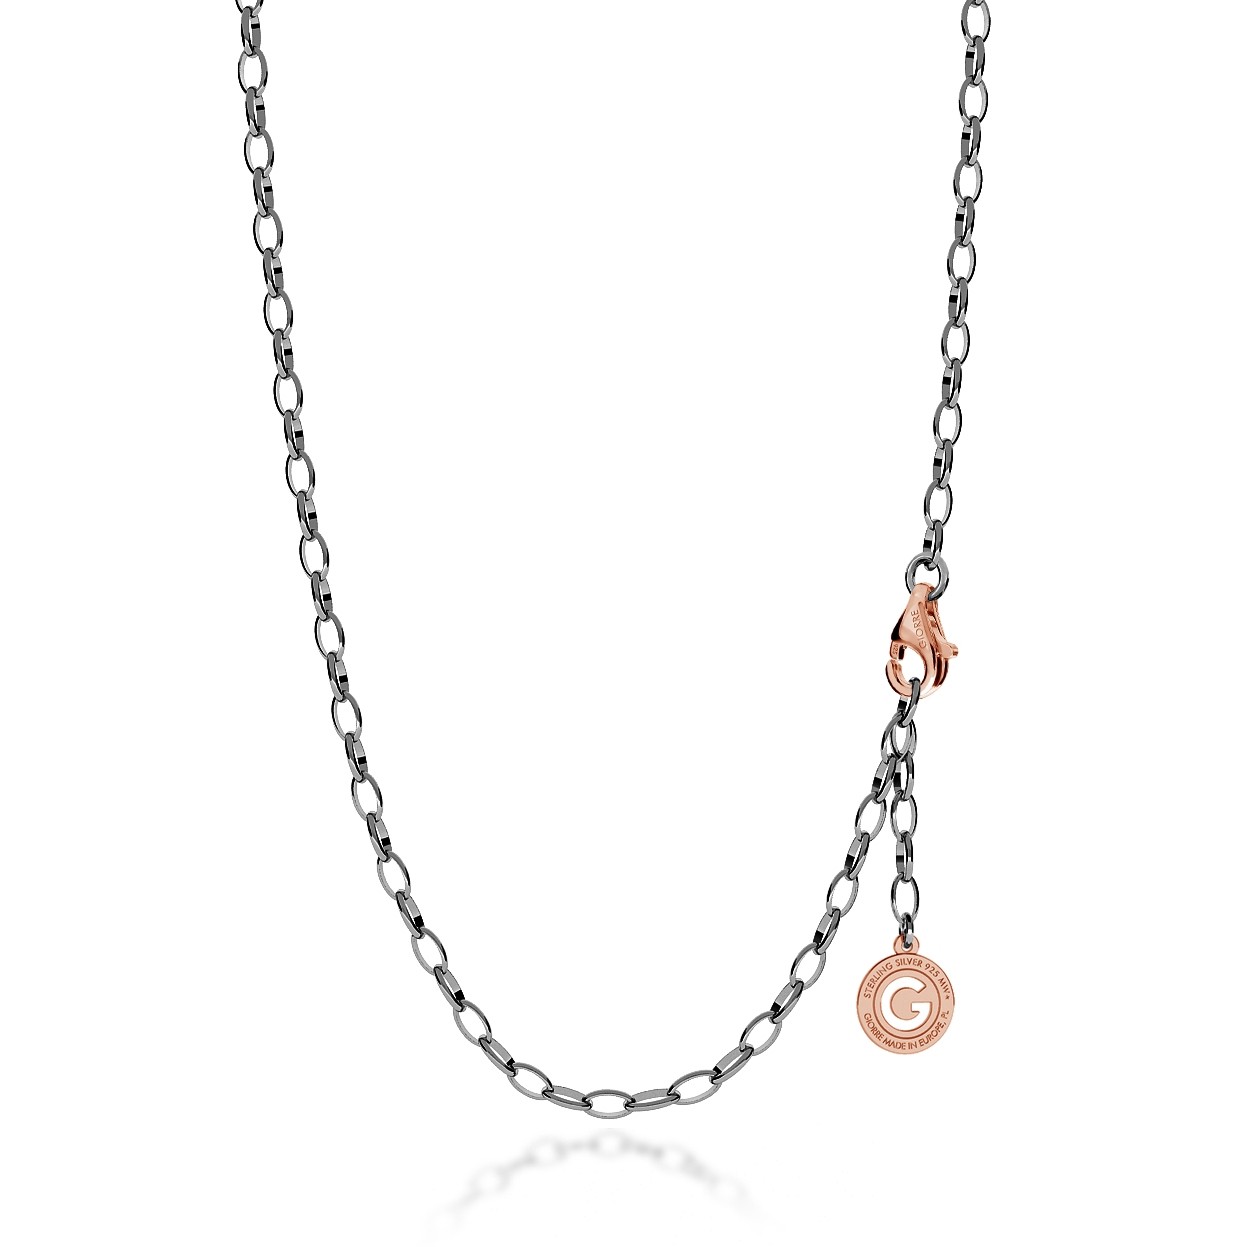 STERLING SILVER NECKLACE 55-65 CM BLACK RHODIUM, PINK GOLD CLASP, LINK 6X4 MM